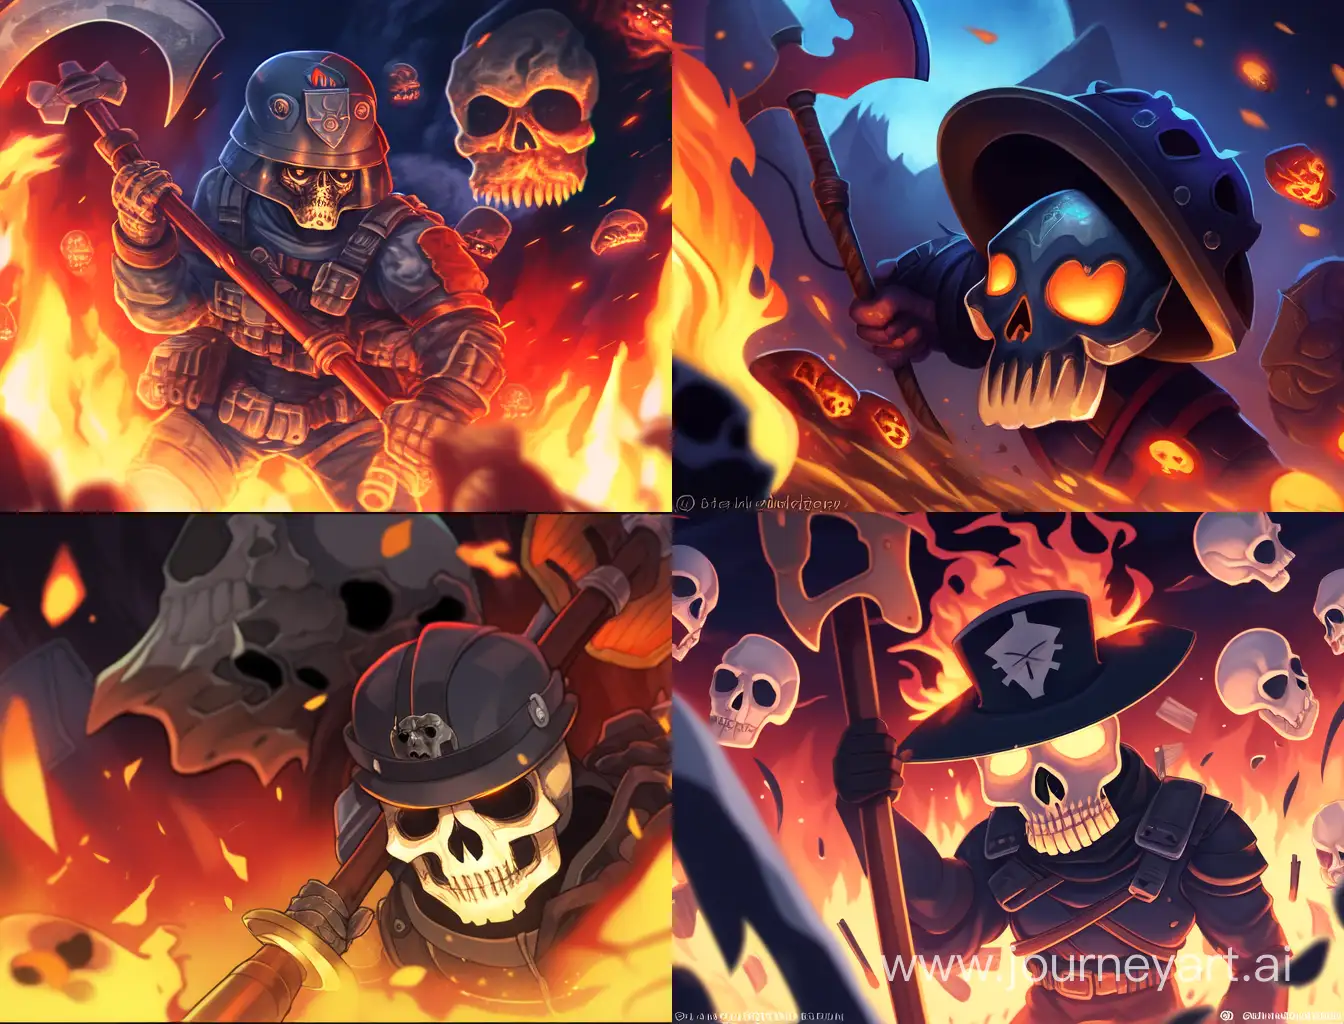 Firefighter-Skull-with-Axe-and-Hooligan-in-Burning-Background